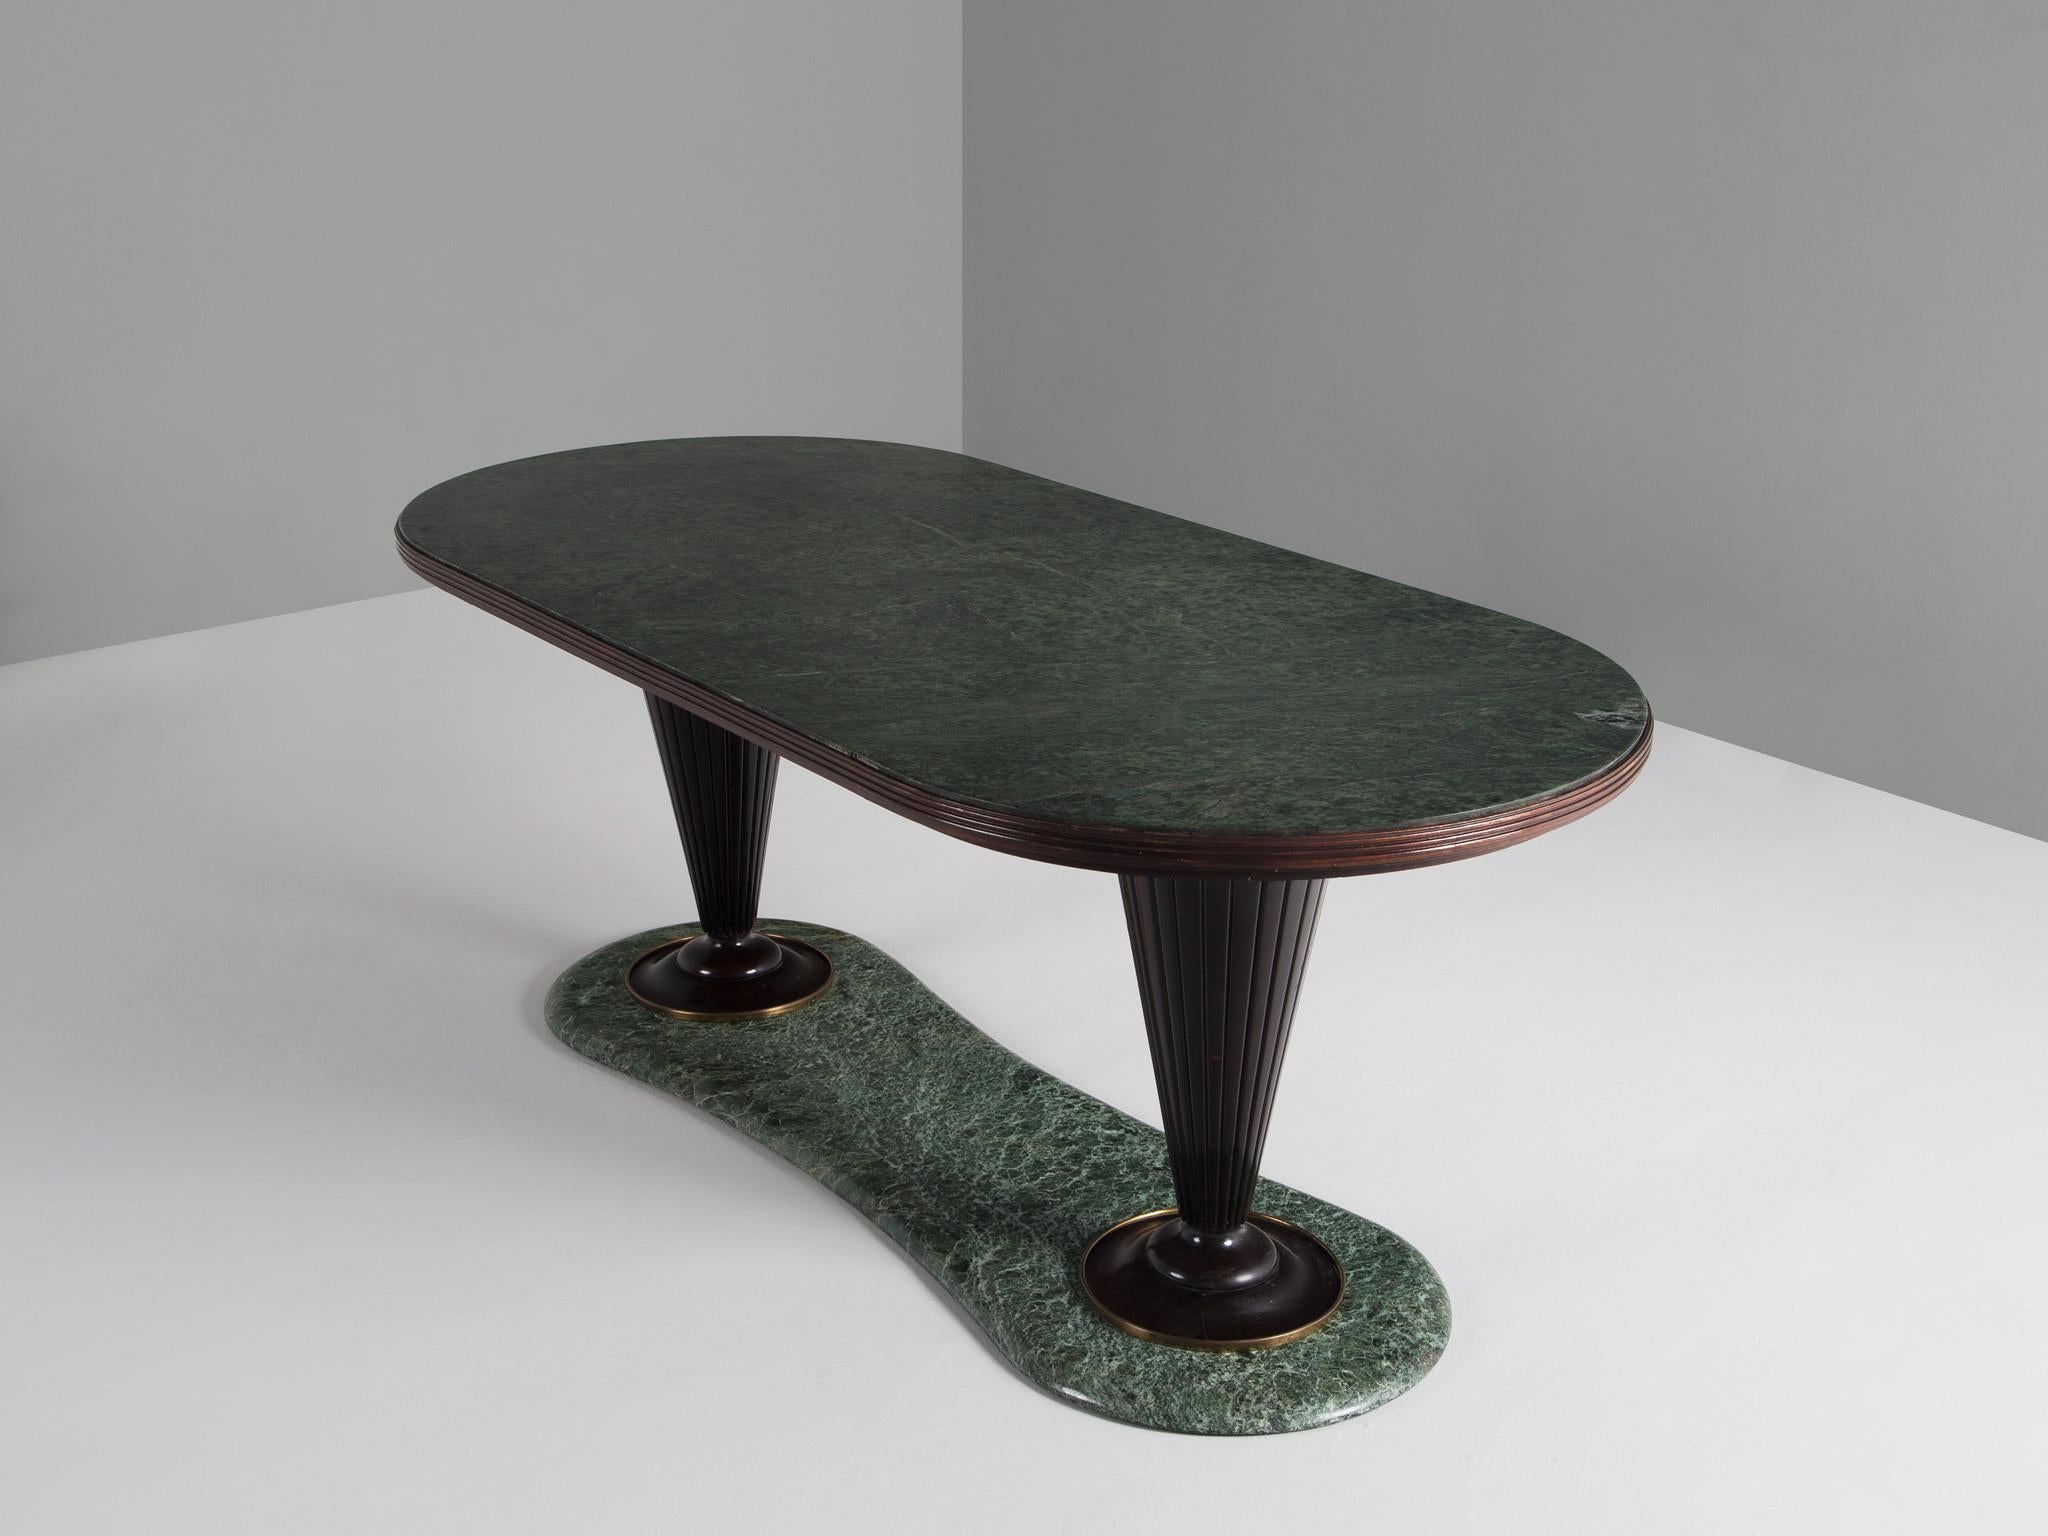 Vittorio Dassi, console table or center table, marble, wood, brass, Italy, 1950s.

Elegant console or center table by Vittorio Dassi with an Alpi Verdi marble top and base, which matches perfectly with the elegant designed tapered legs. The stunning